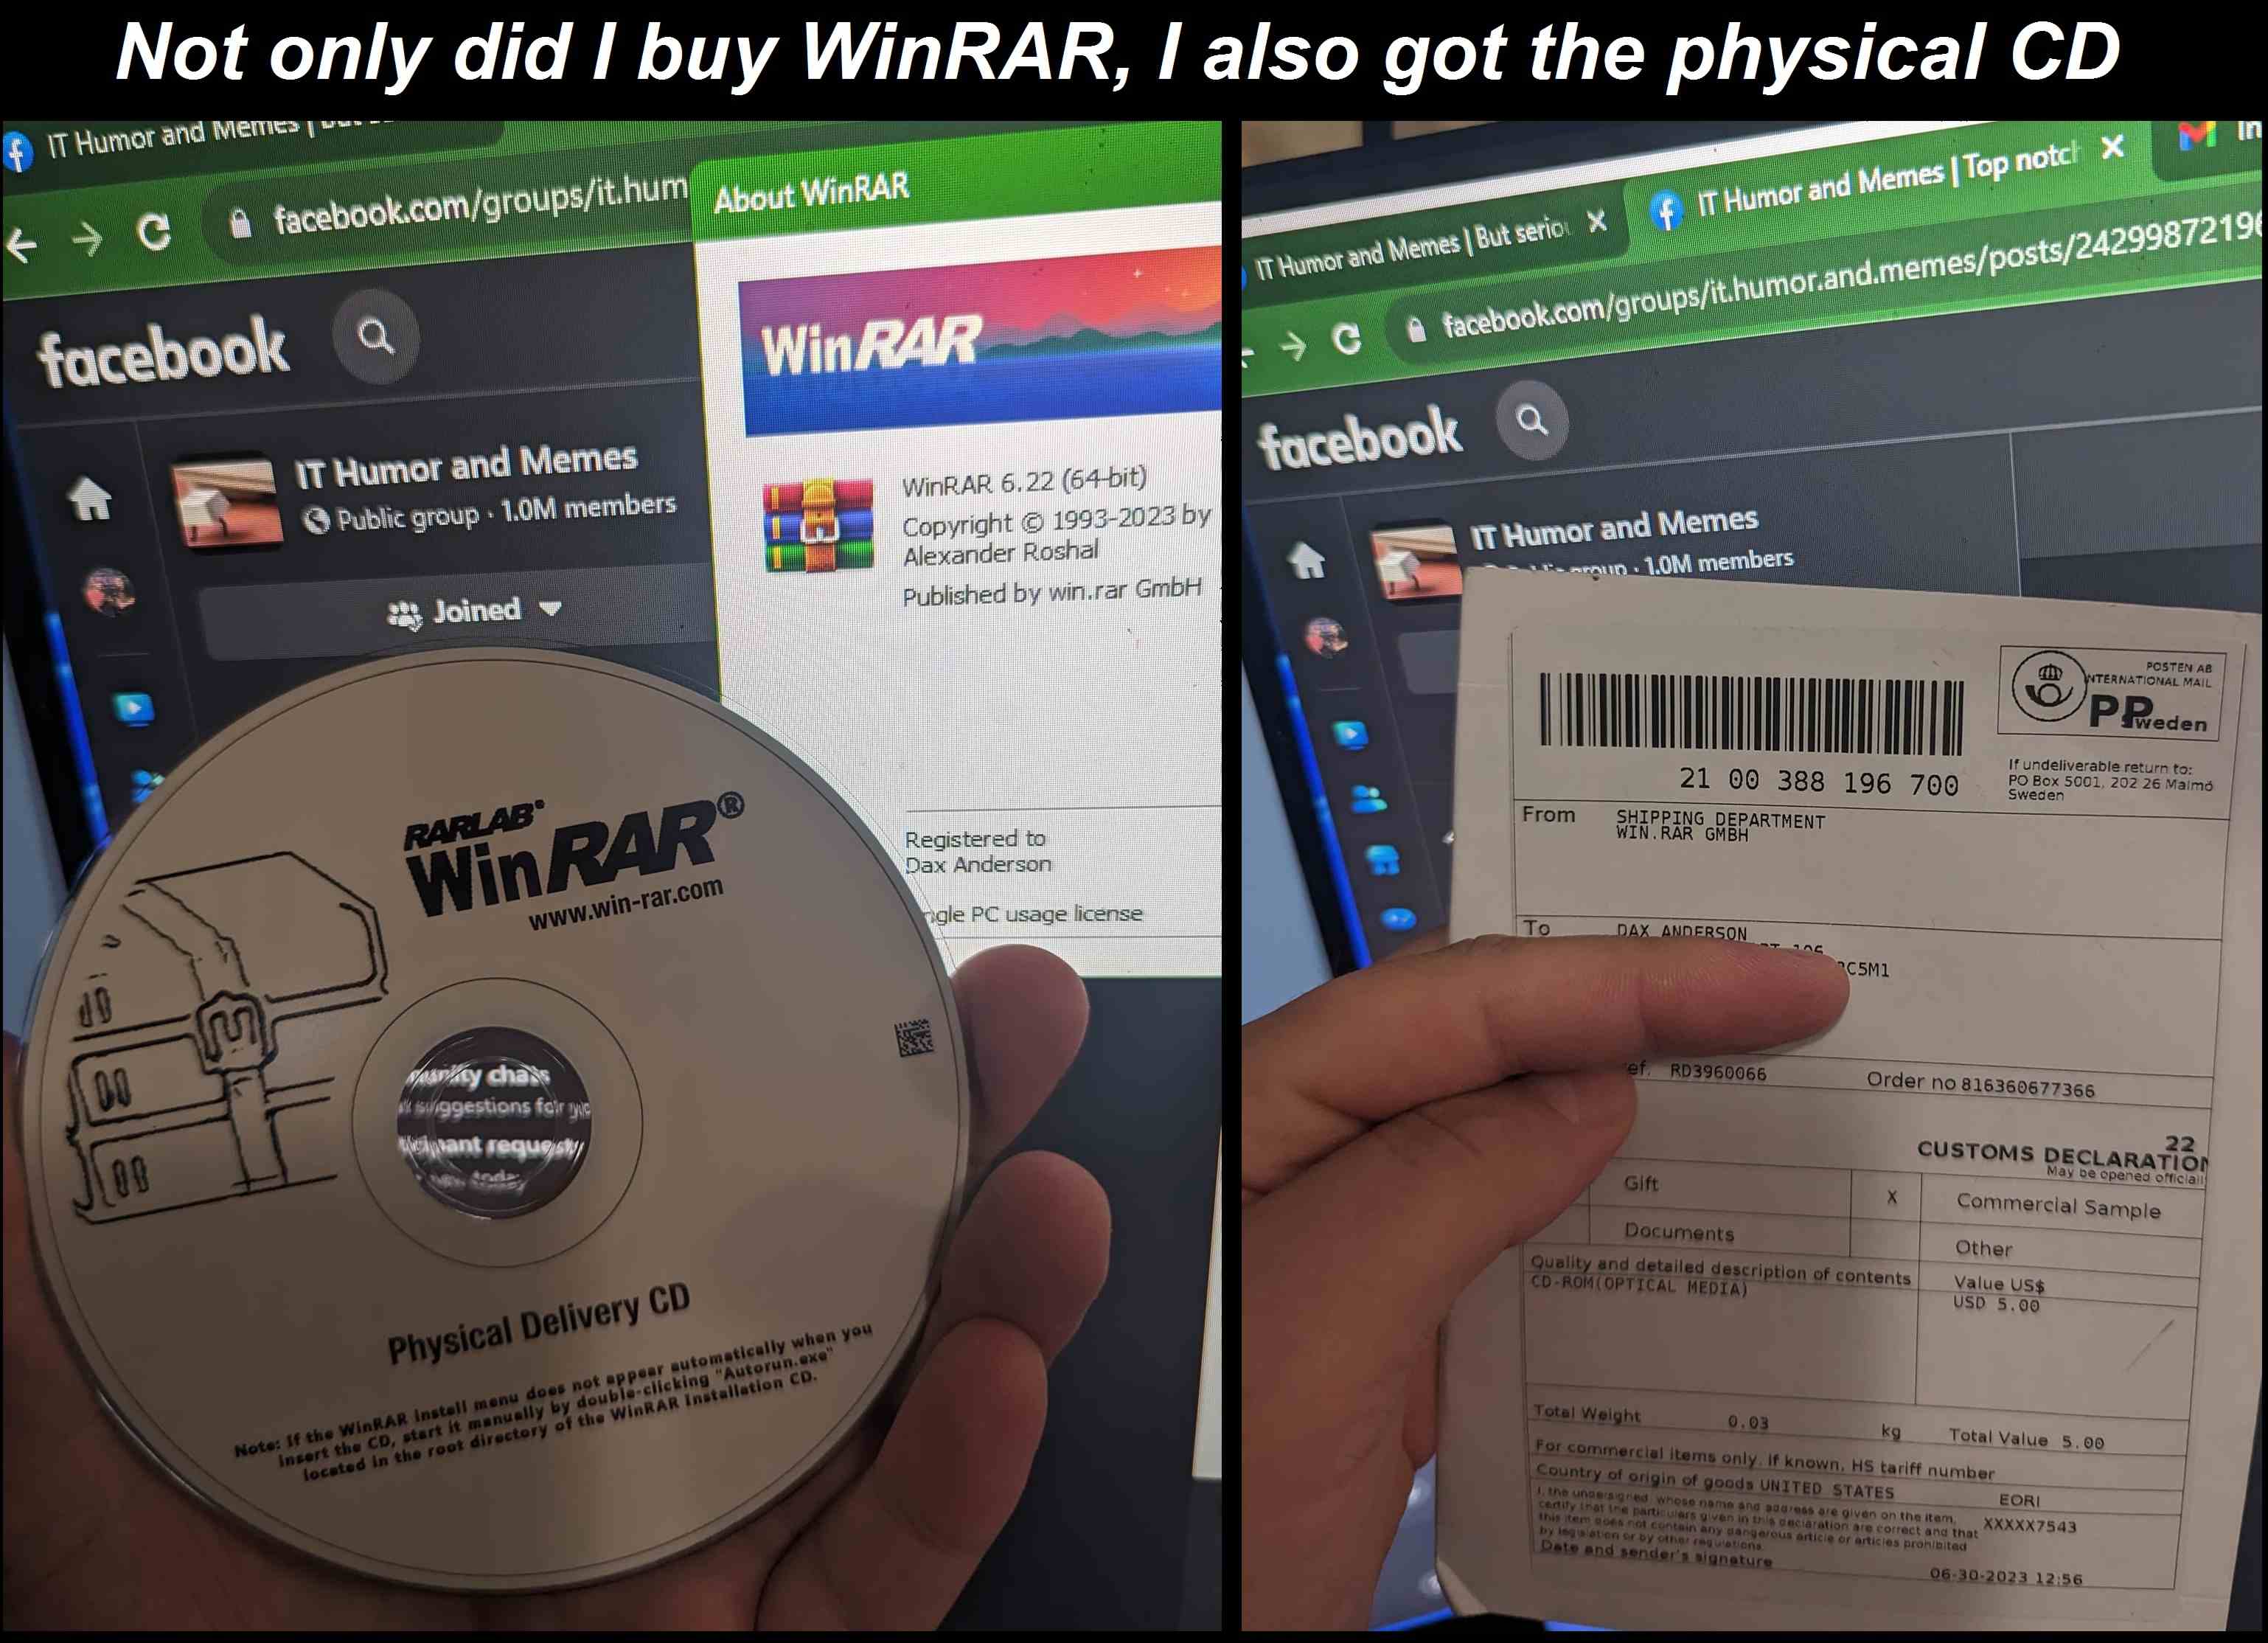 Not only did i buy winrar, i also got the physical CD